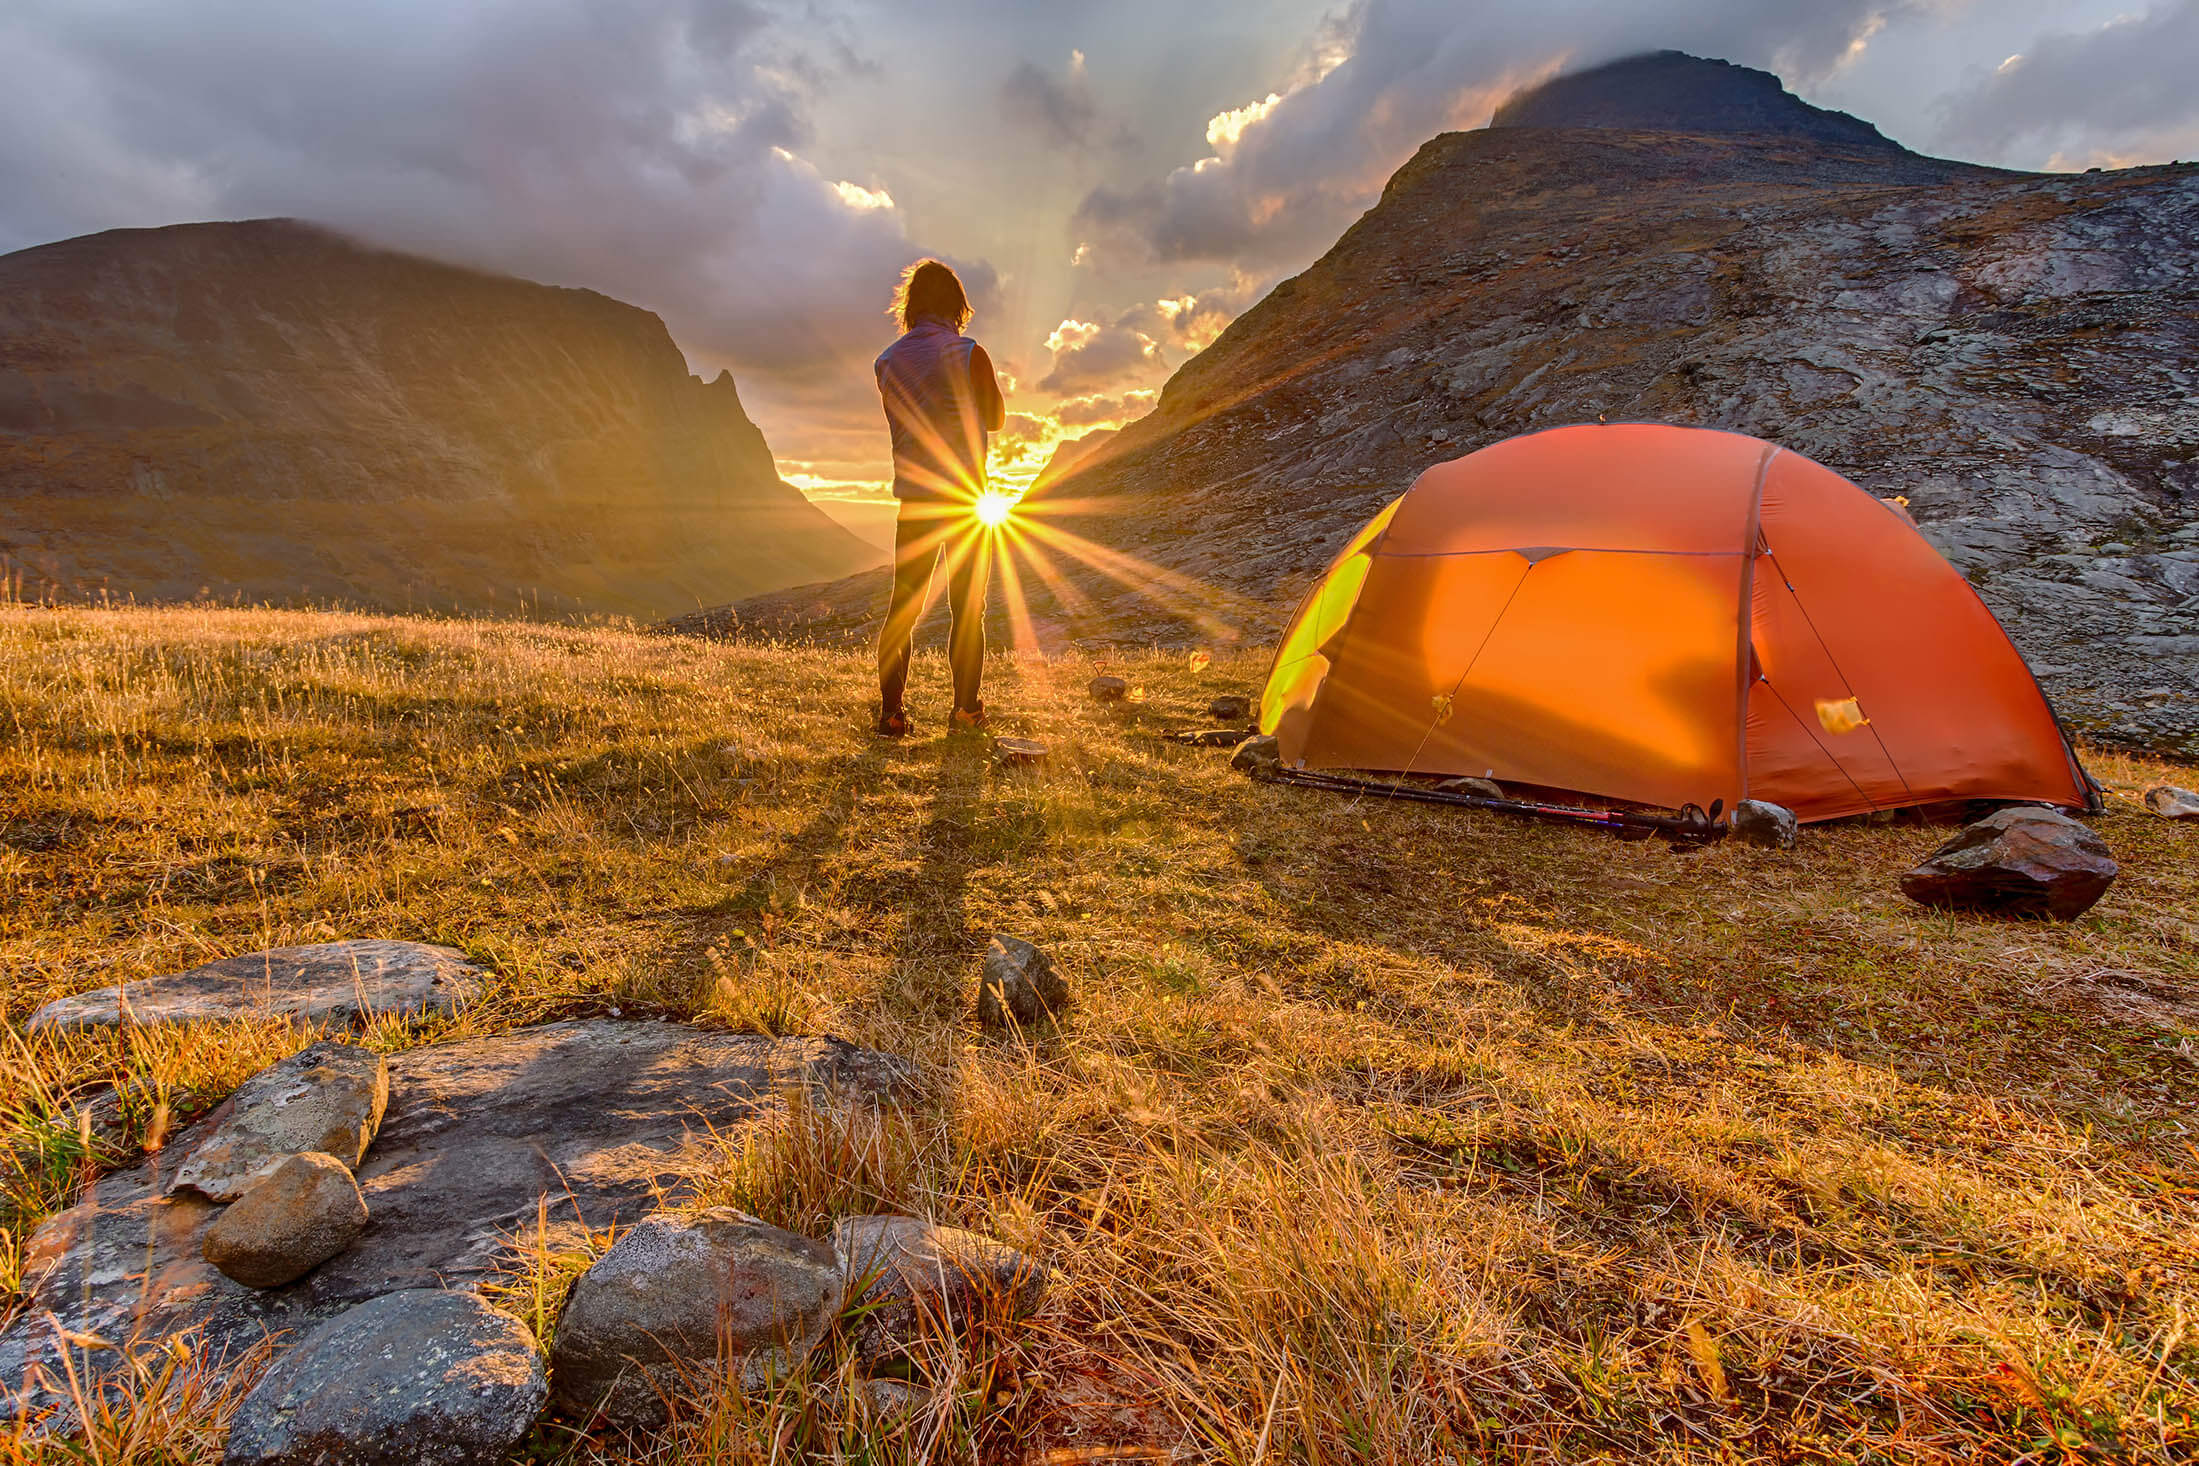 How to Sleep Comfortably While Wild Camping